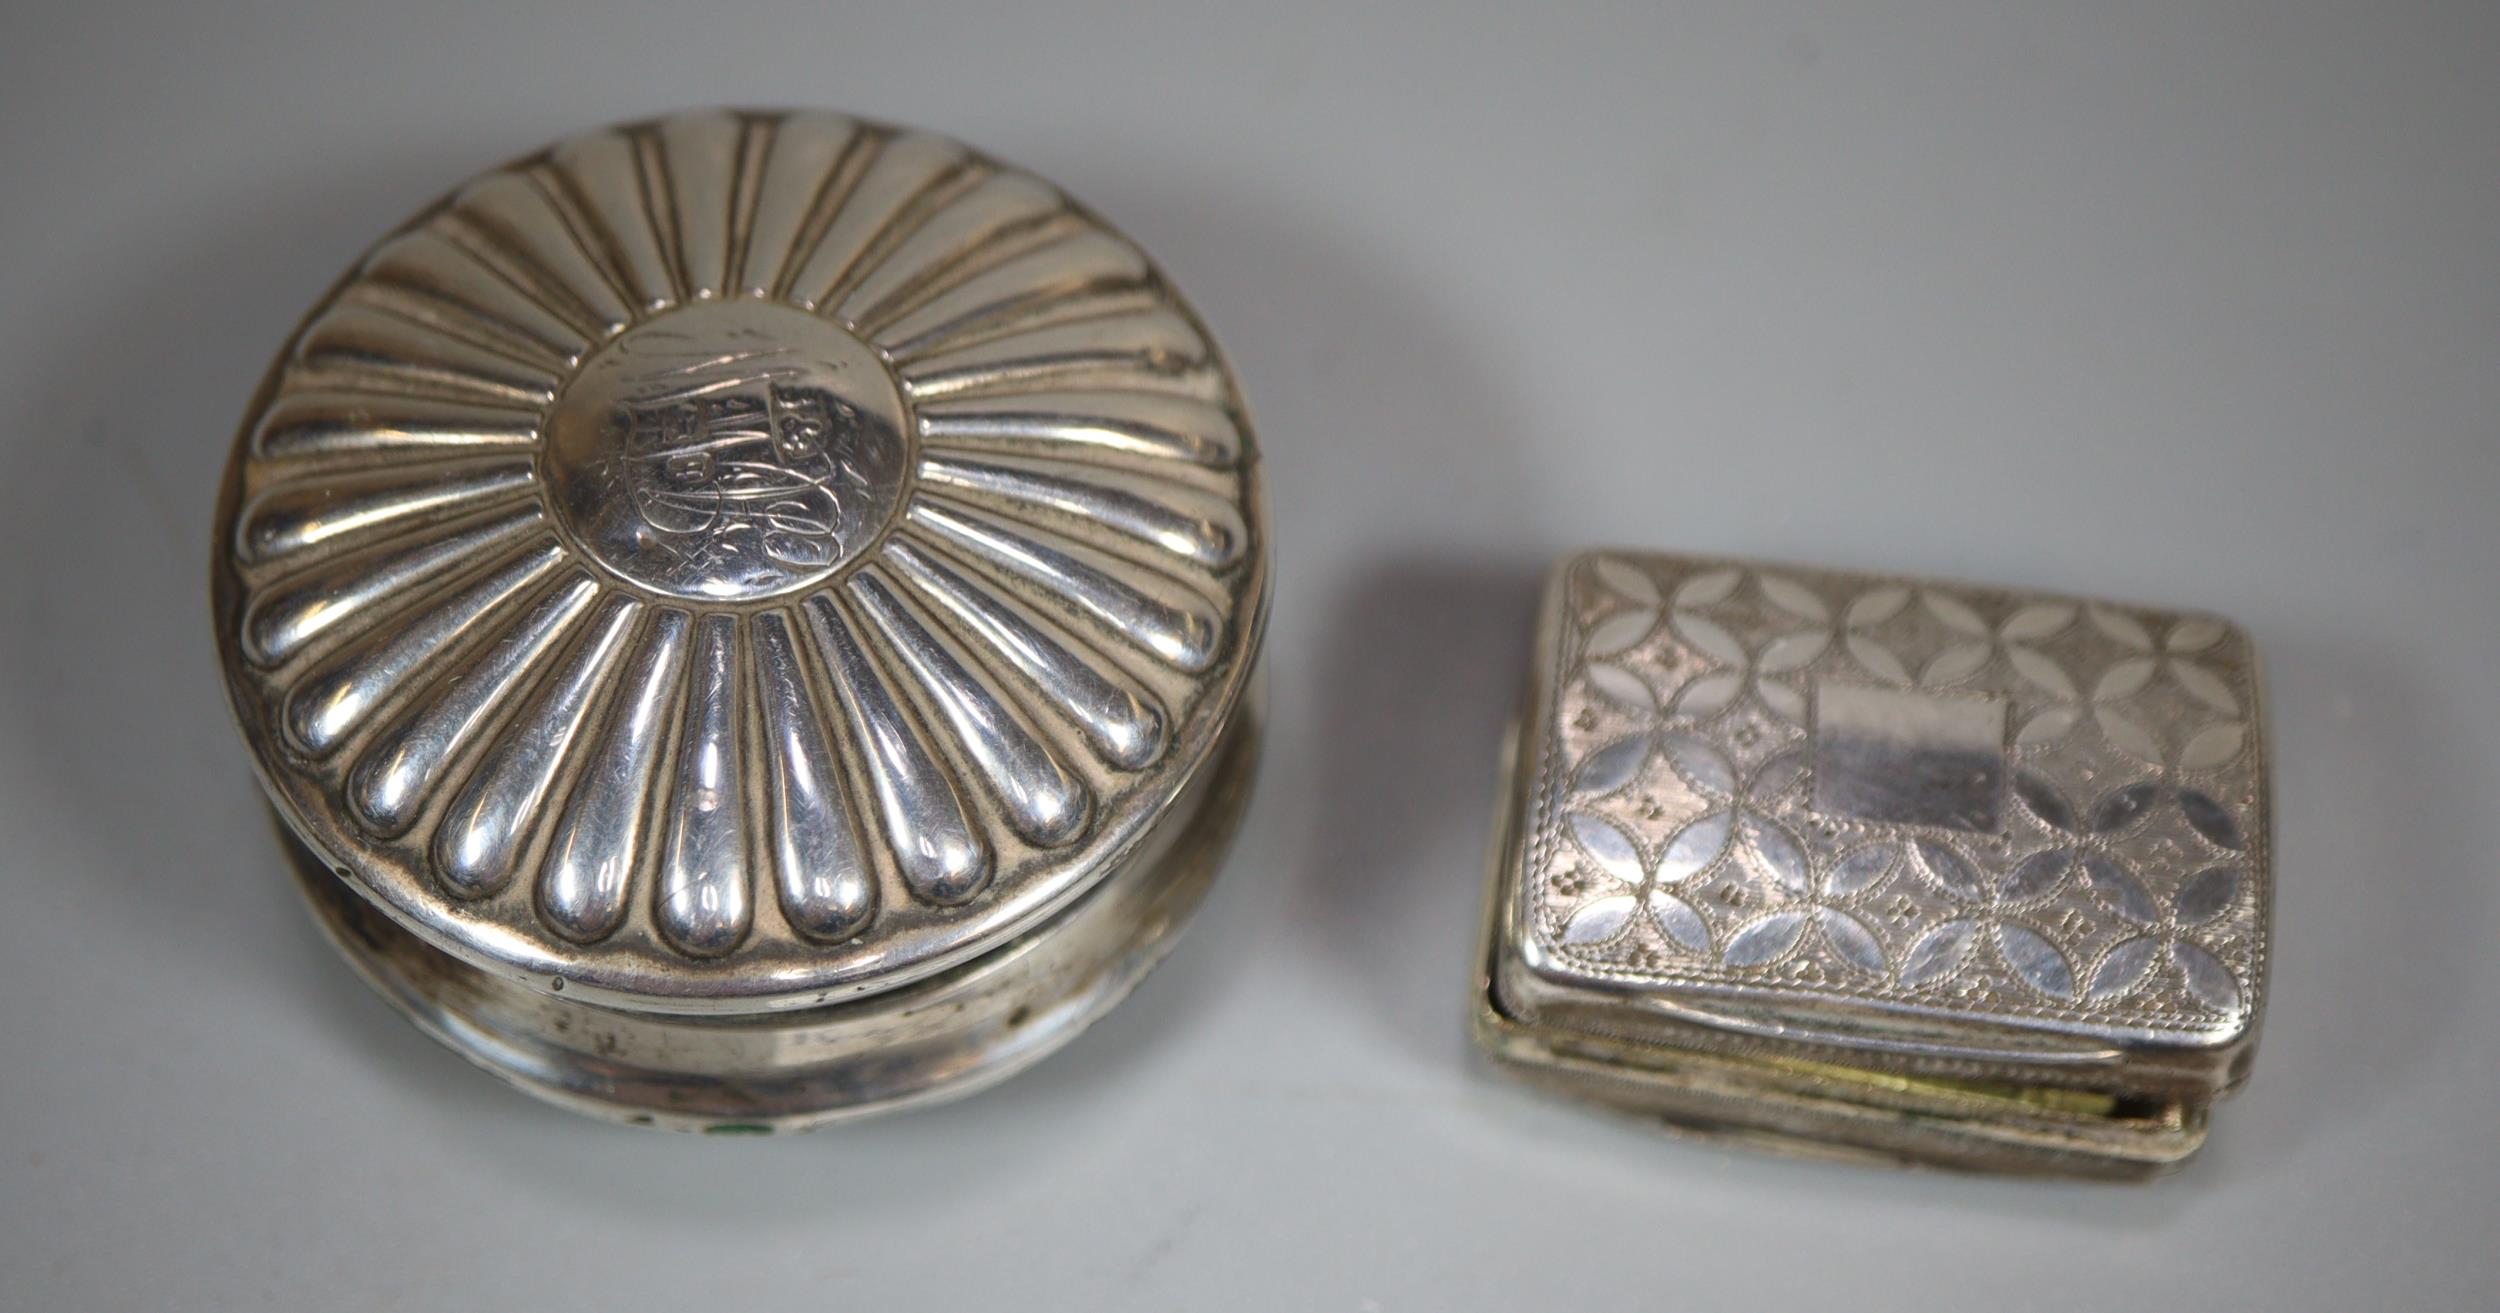 Early 19th century silver and gilt vinaigrette by John Thropp, Birmingham 1827 together with another